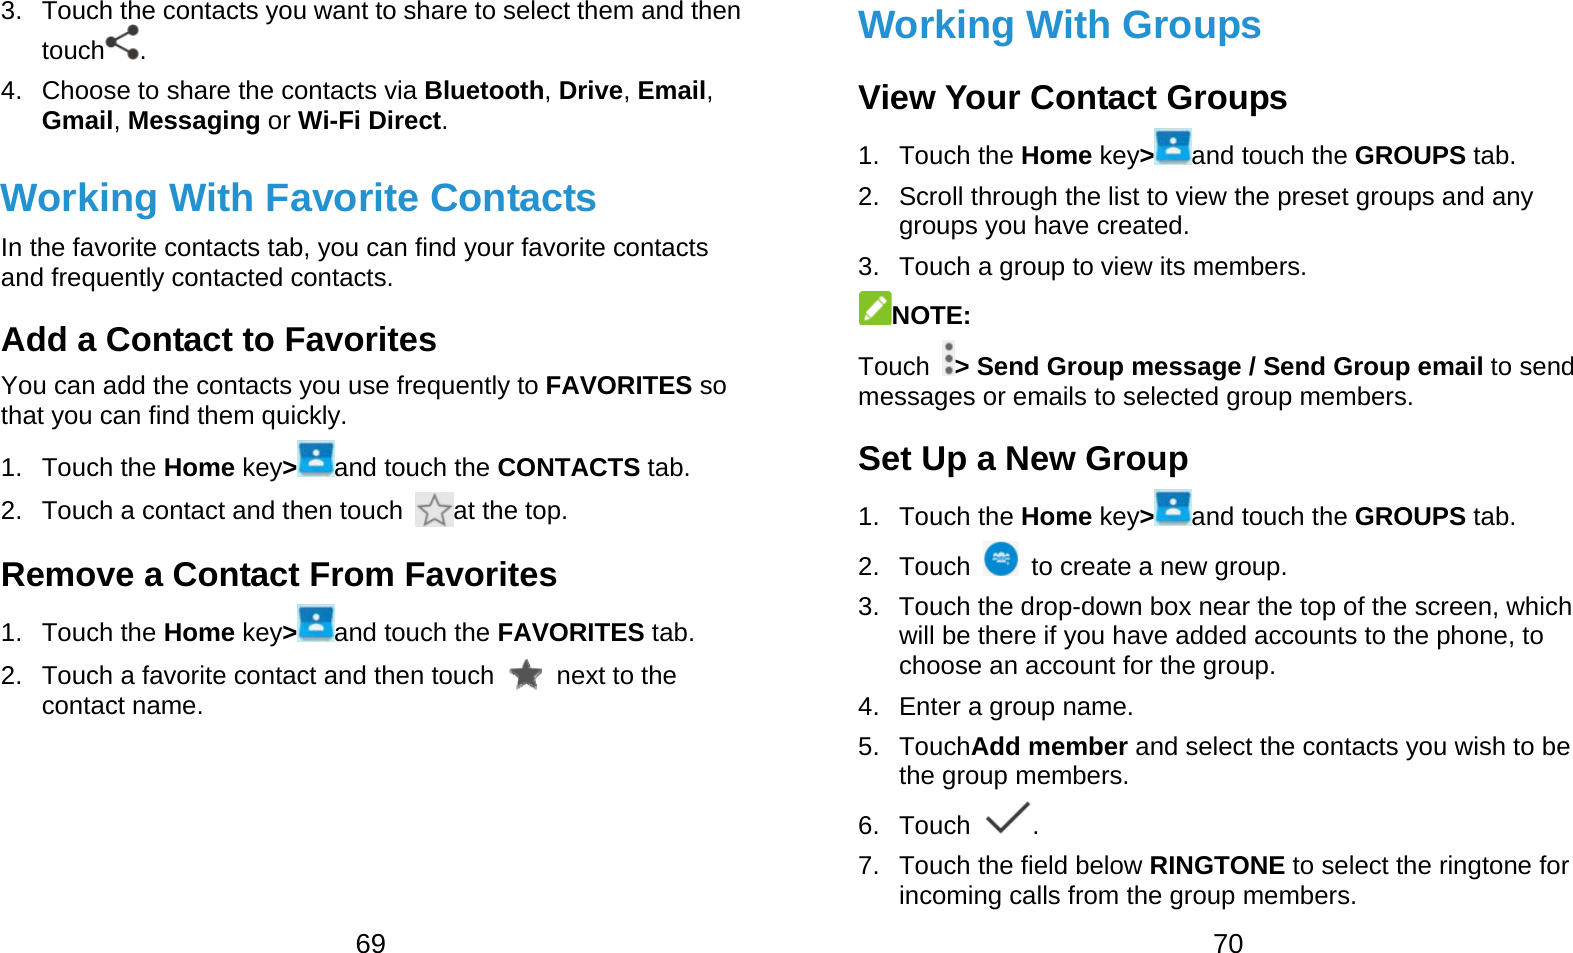  69 3.  Touch the contacts you want to share to select them and then touch . 4.  Choose to share the contacts via Bluetooth, Drive, Email, Gmail, Messaging or Wi-Fi Direct. Working With Favorite Contacts In the favorite contacts tab, you can find your favorite contacts and frequently contacted contacts. Add a Contact to Favorites You can add the contacts you use frequently to FAVORITES so that you can find them quickly. 1. Touch the Home key&gt;and touch the CONTACTS tab. 2.  Touch a contact and then touch  at the top. Remove a Contact From Favorites 1. Touch the Home key&gt;and touch the FAVORITES tab. 2.  Touch a favorite contact and then touch   next to the contact name.  70 Working With Groups View Your Contact Groups 1. Touch the Home key&gt;and touch the GROUPS tab. 2.  Scroll through the list to view the preset groups and any groups you have created. 3.  Touch a group to view its members. NOTE:  Touch  &gt; Send Group message / Send Group email to send messages or emails to selected group members. Set Up a New Group 1. Touch the Home key&gt;and touch the GROUPS tab. 2. Touch    to create a new group. 3.  Touch the drop-down box near the top of the screen, which will be there if you have added accounts to the phone, to choose an account for the group. 4.  Enter a group name. 5. TouchAdd member and select the contacts you wish to be the group members. 6. Touch  . 7.  Touch the field below RINGTONE to select the ringtone for incoming calls from the group members. 